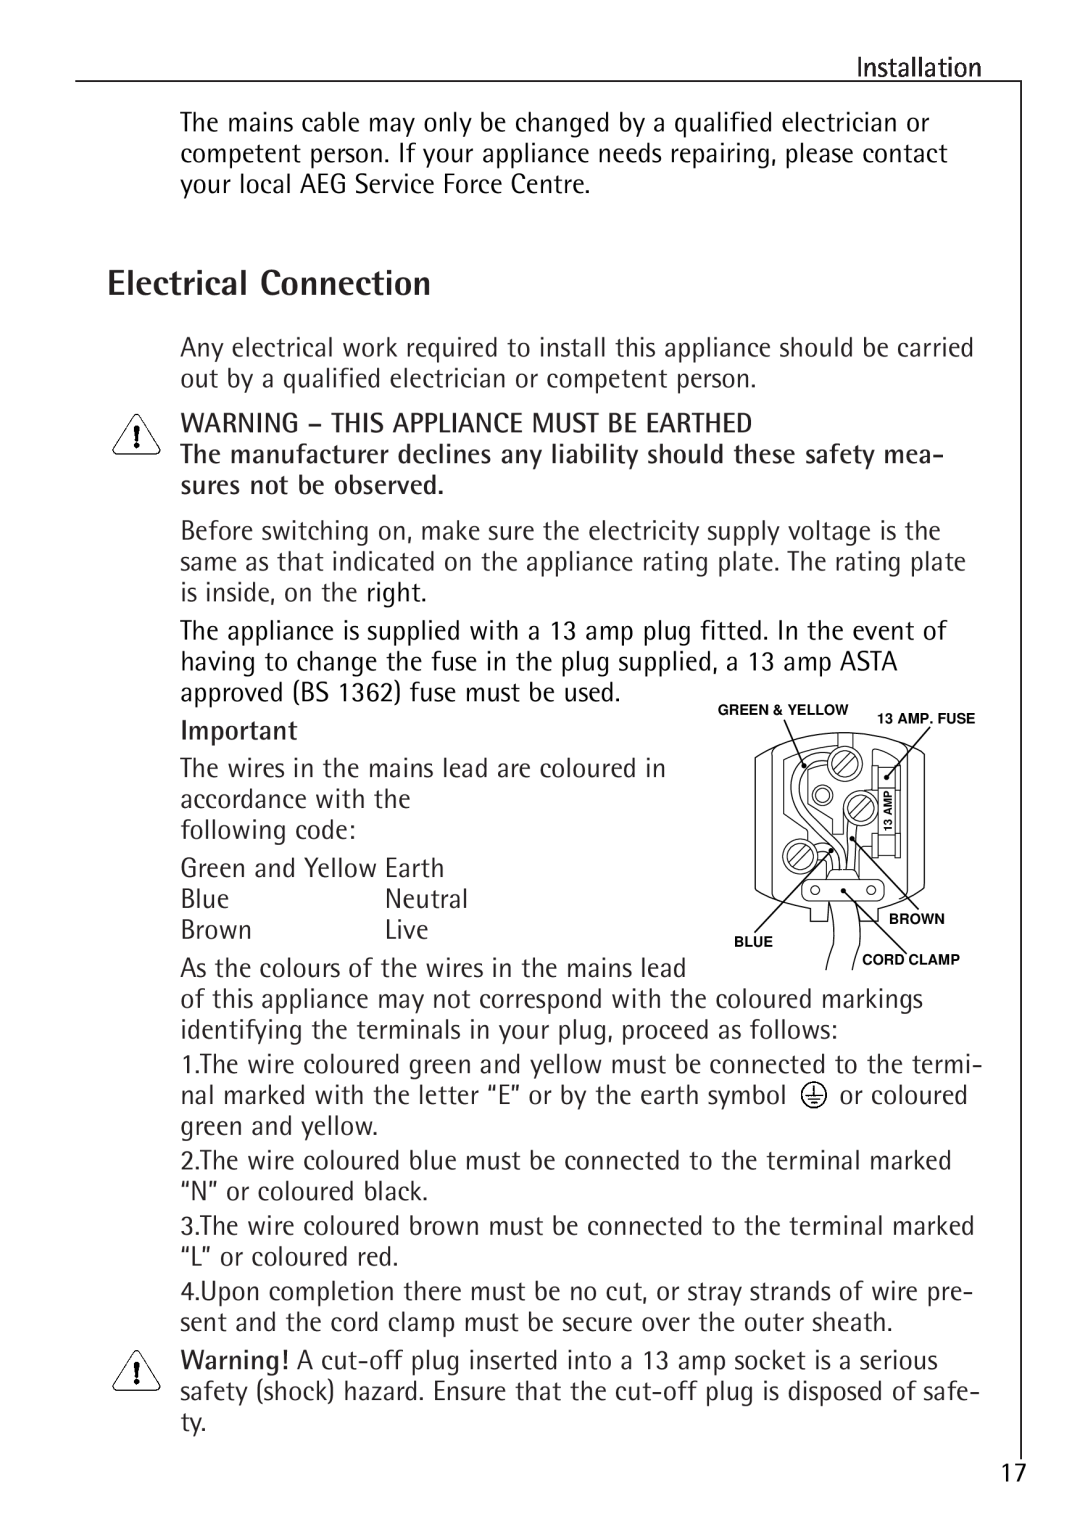 Electrolux 86000 i installation instructions Electrical Connection, Warning - This Appliance Must Be Earthed 